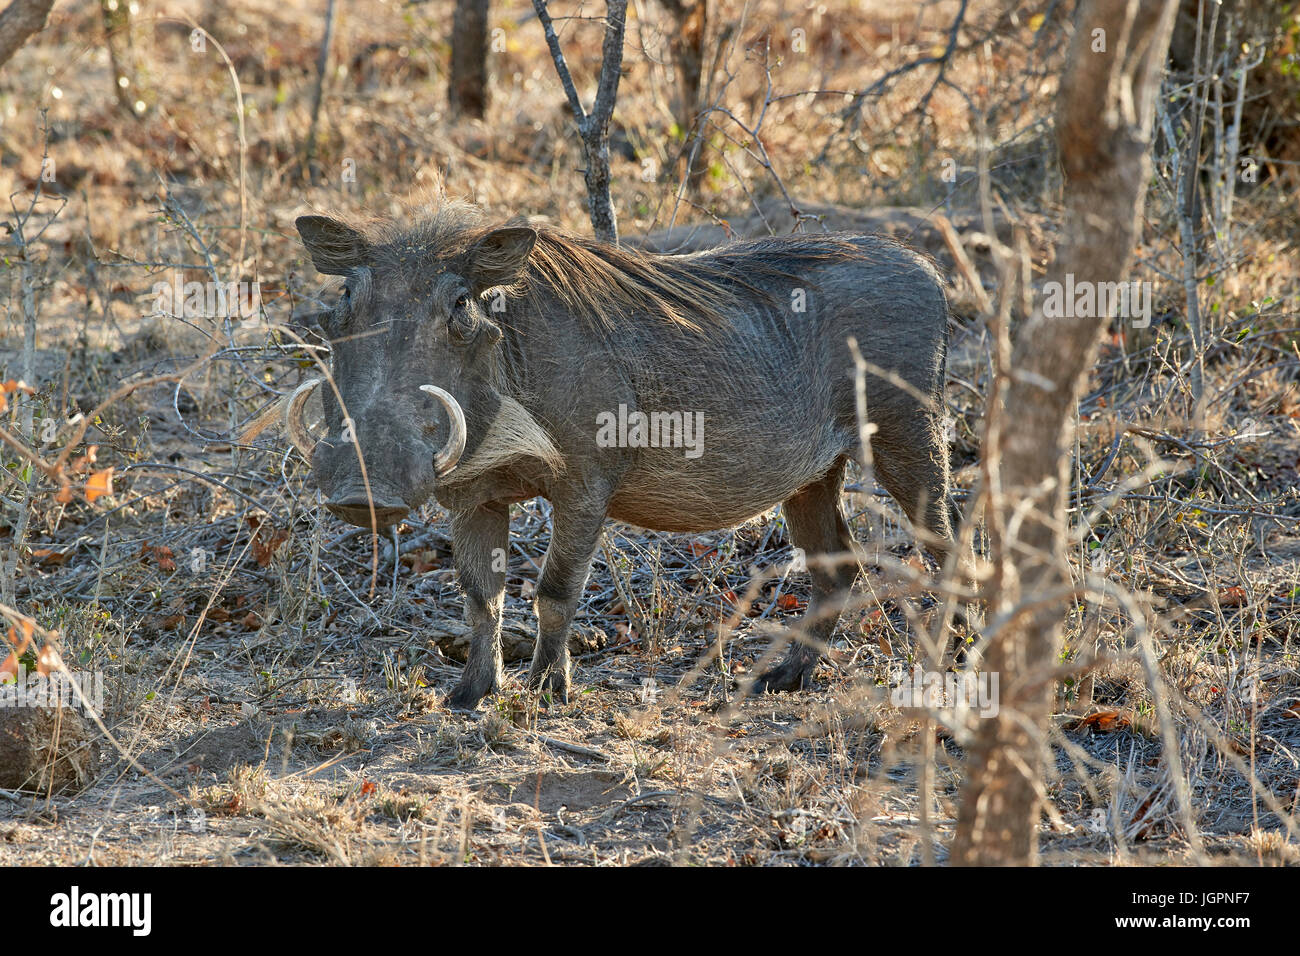 Common Warthog, Phocochoerus africanus, standing in the undergrowth, Sabi Sands game reserve, South Africa Stock Photo